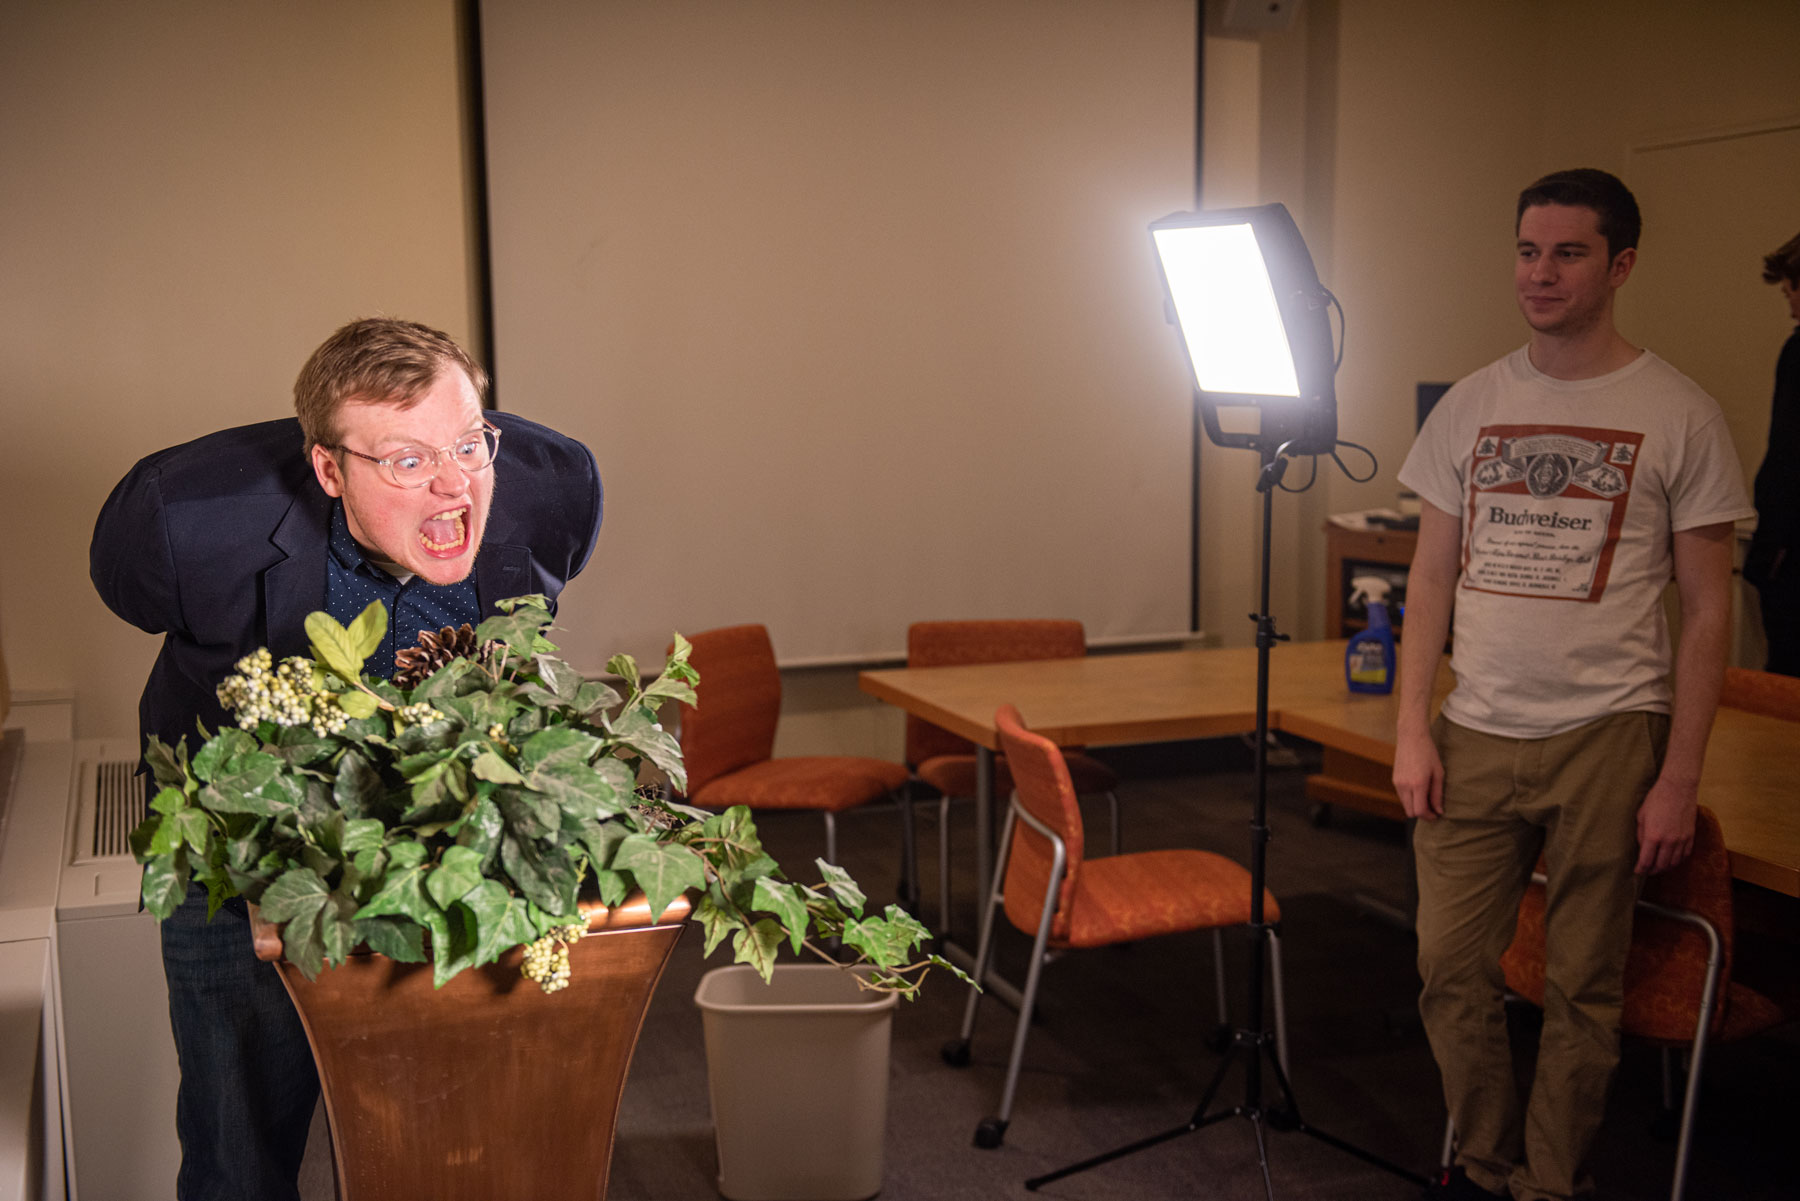 A man illuminated by video lighting shouting at a plant